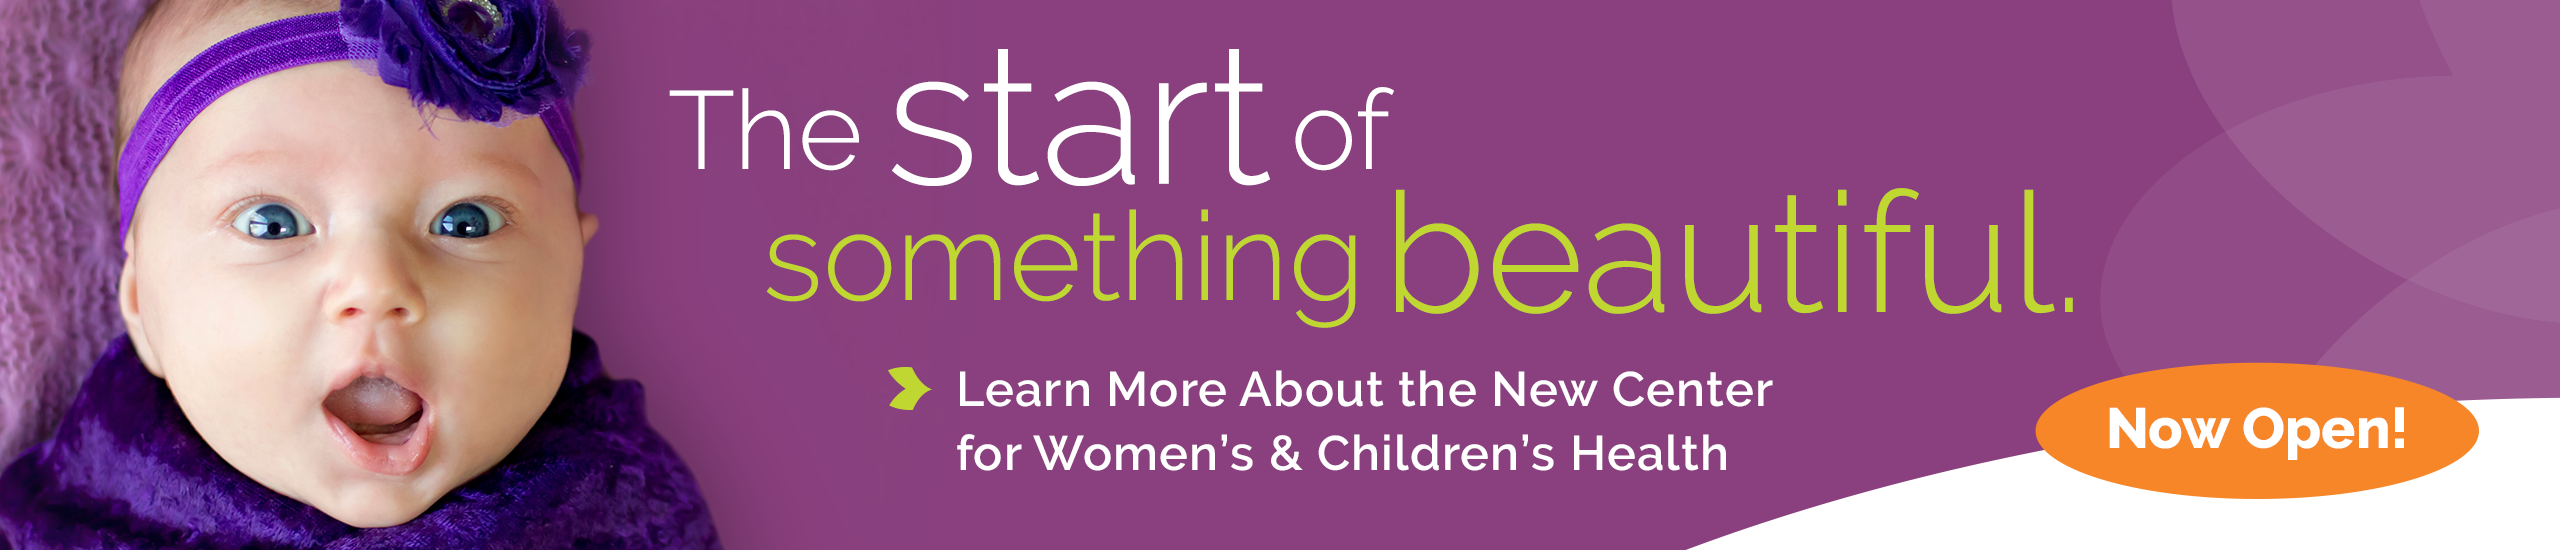 Learn More About the New Center for Women's & Children's Health